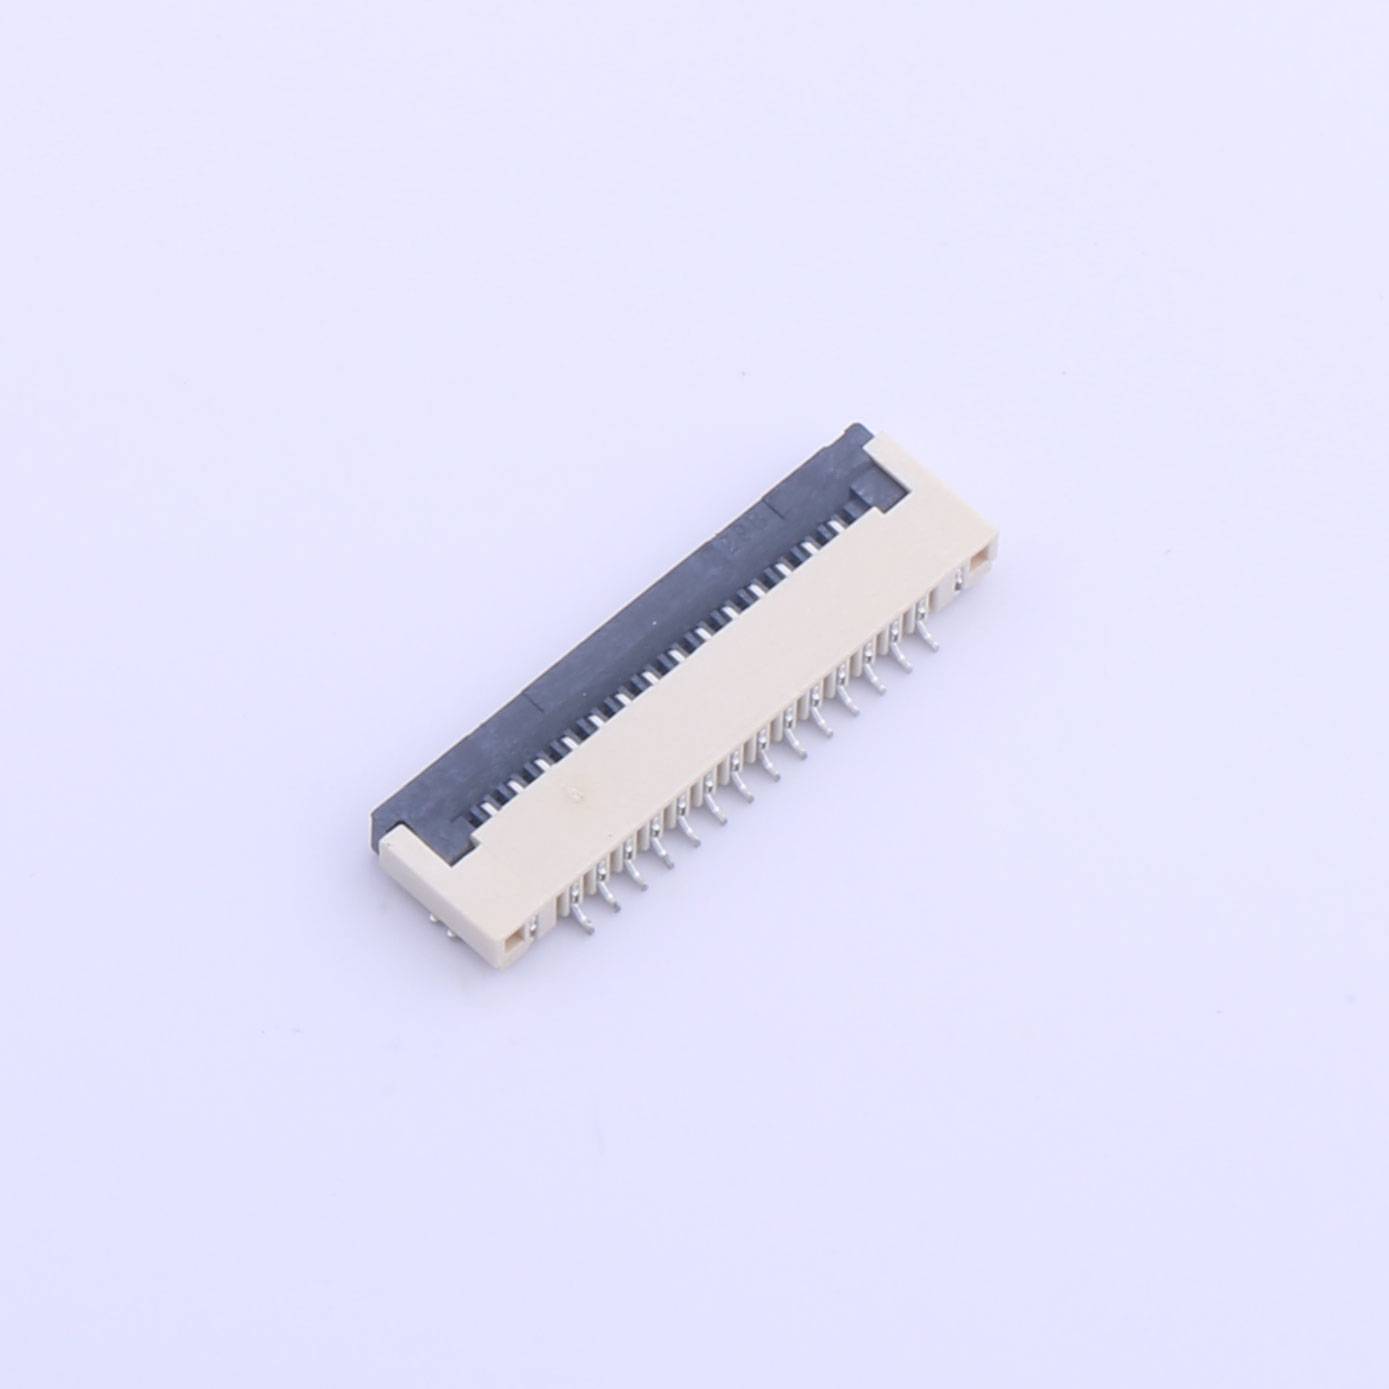 Kinghelm FFC/FPC Connector 14p Pitch 1mm - KH-FG1.0-H2.0-14pin